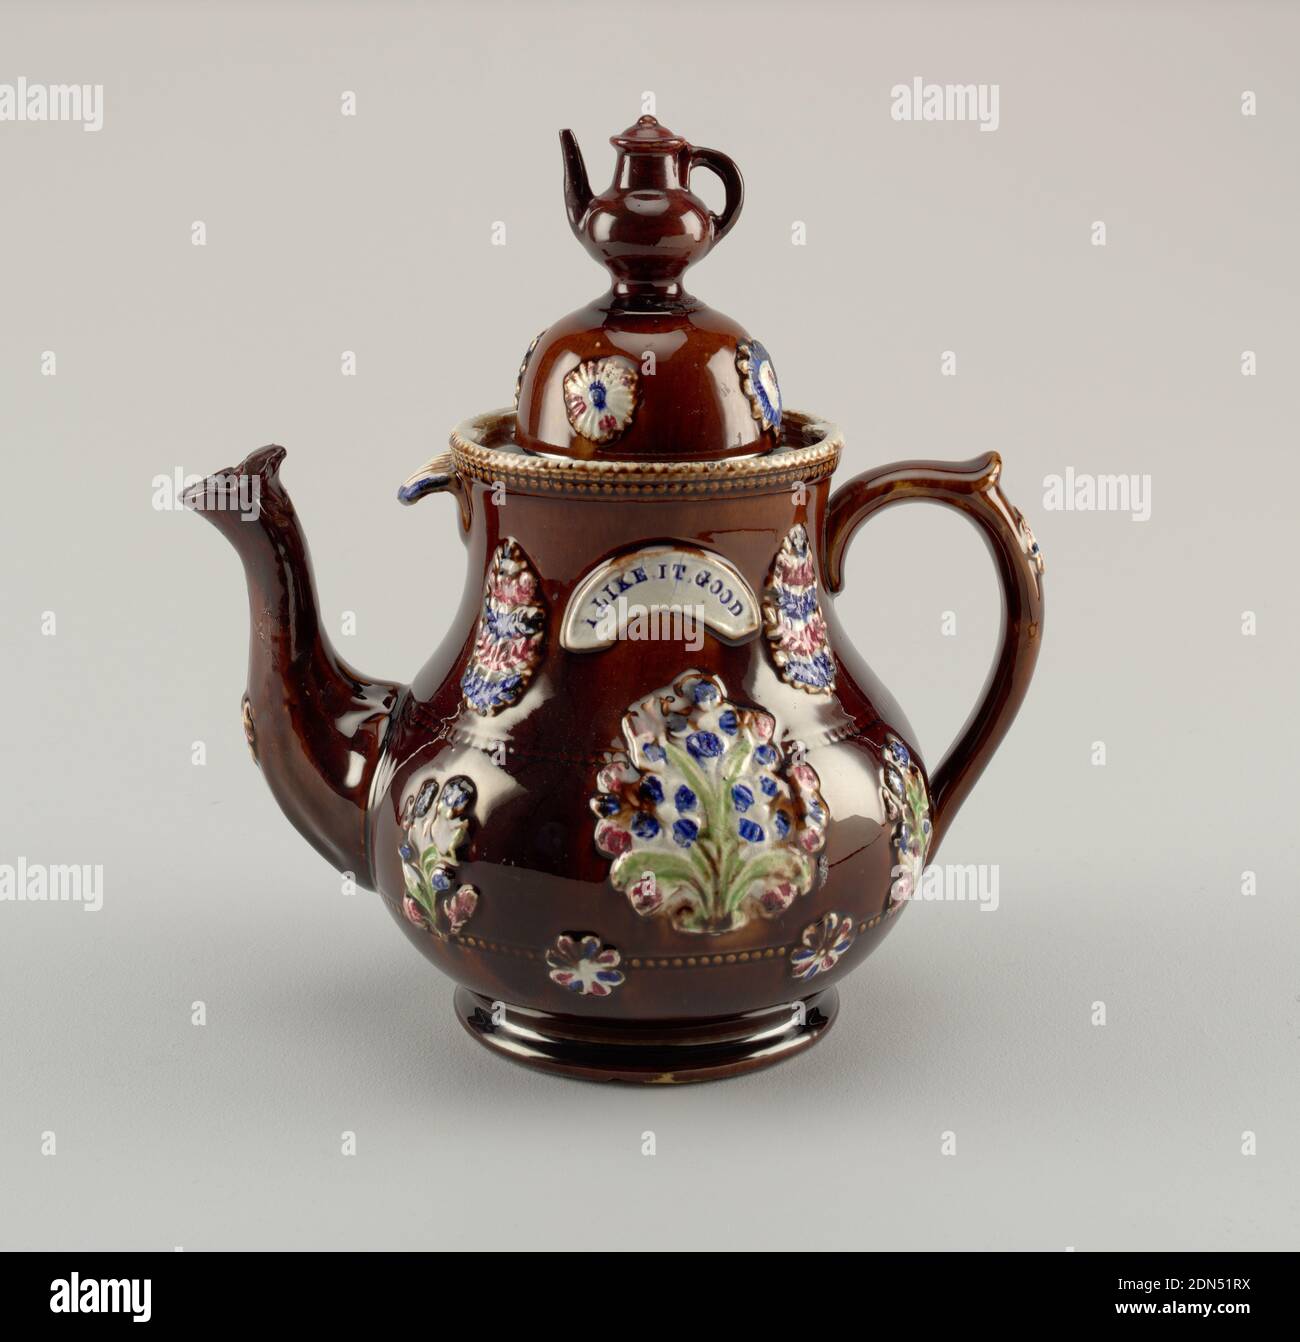 Barge Pot, 'I Like It Good', Glazed earthenware, A brown teapot and dome lid decorated with a flower pattern. On the side, a white arch says: 'I Like it Good'. The knob on the lid a miniature teapot., England, 18th–19th century, ceramics, Decorative Arts, Teapot and lid, Teapot and lid Stock Photo